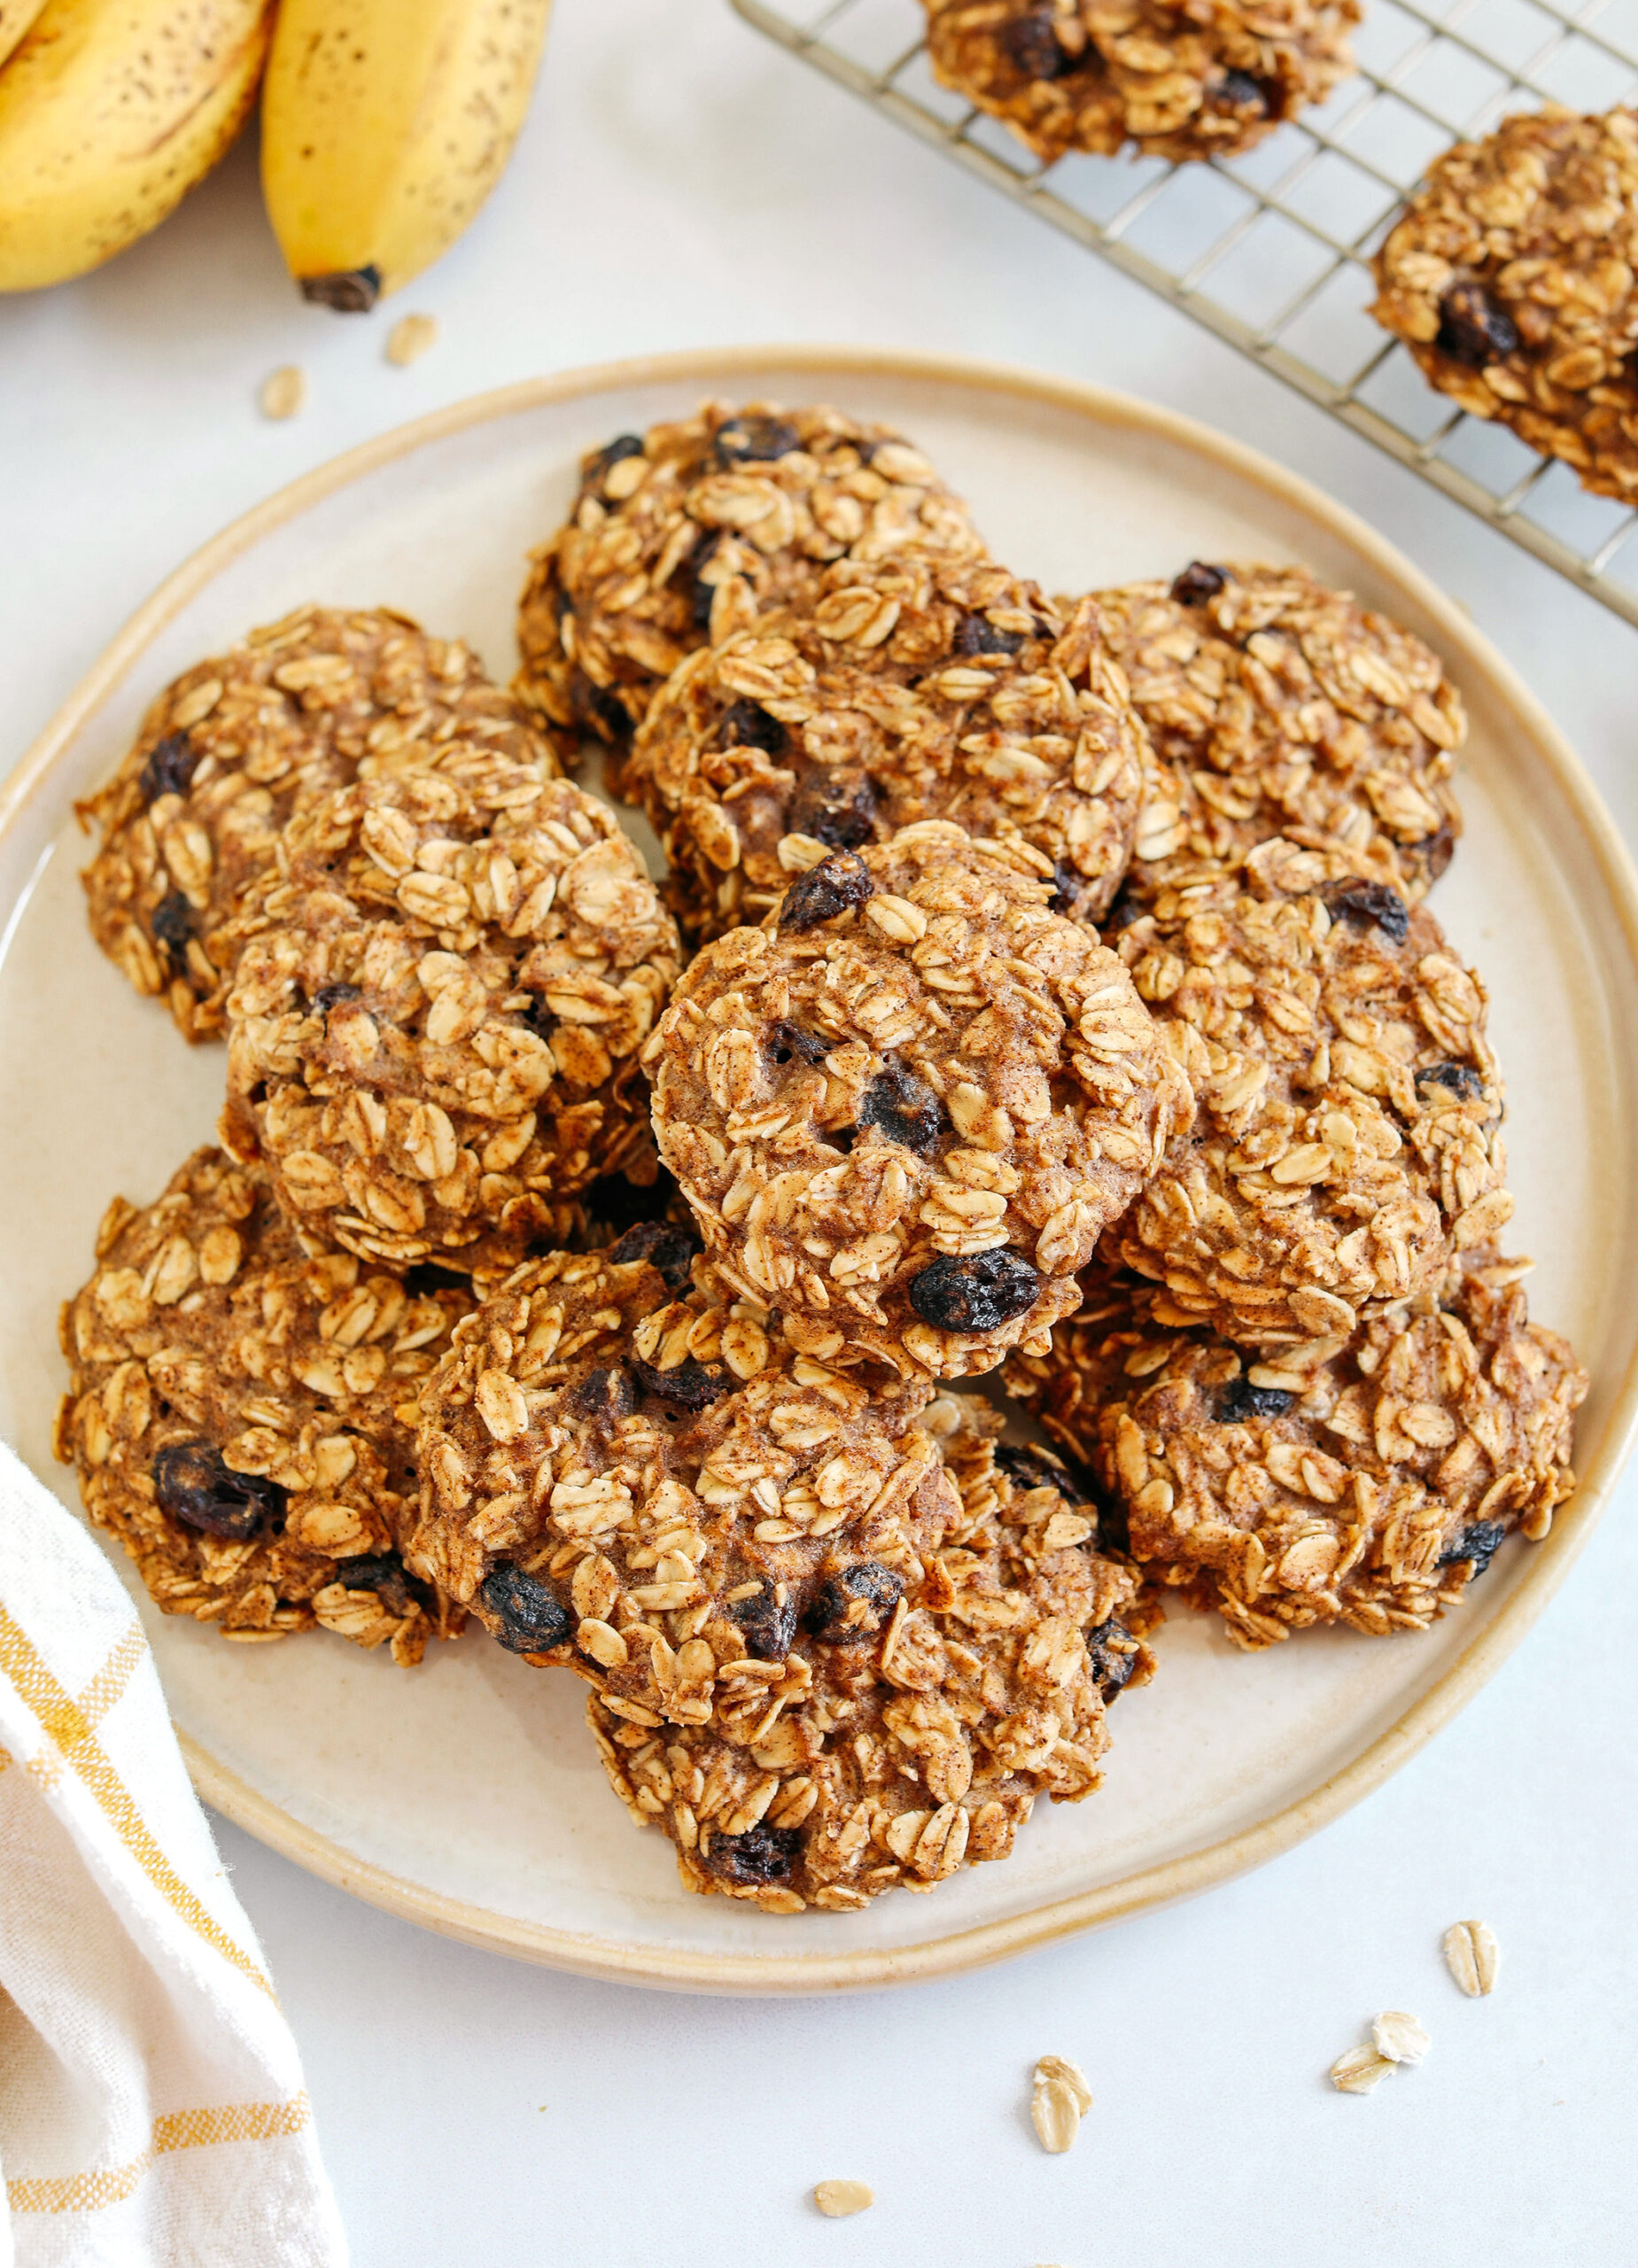 Chewy and delicious Banana Oatmeal Breakfast Cookies easily made with simple, wholesome ingredients and naturally sweetened for the perfect healthy cookie you can enjoy for breakfast or serve as an after school snack!